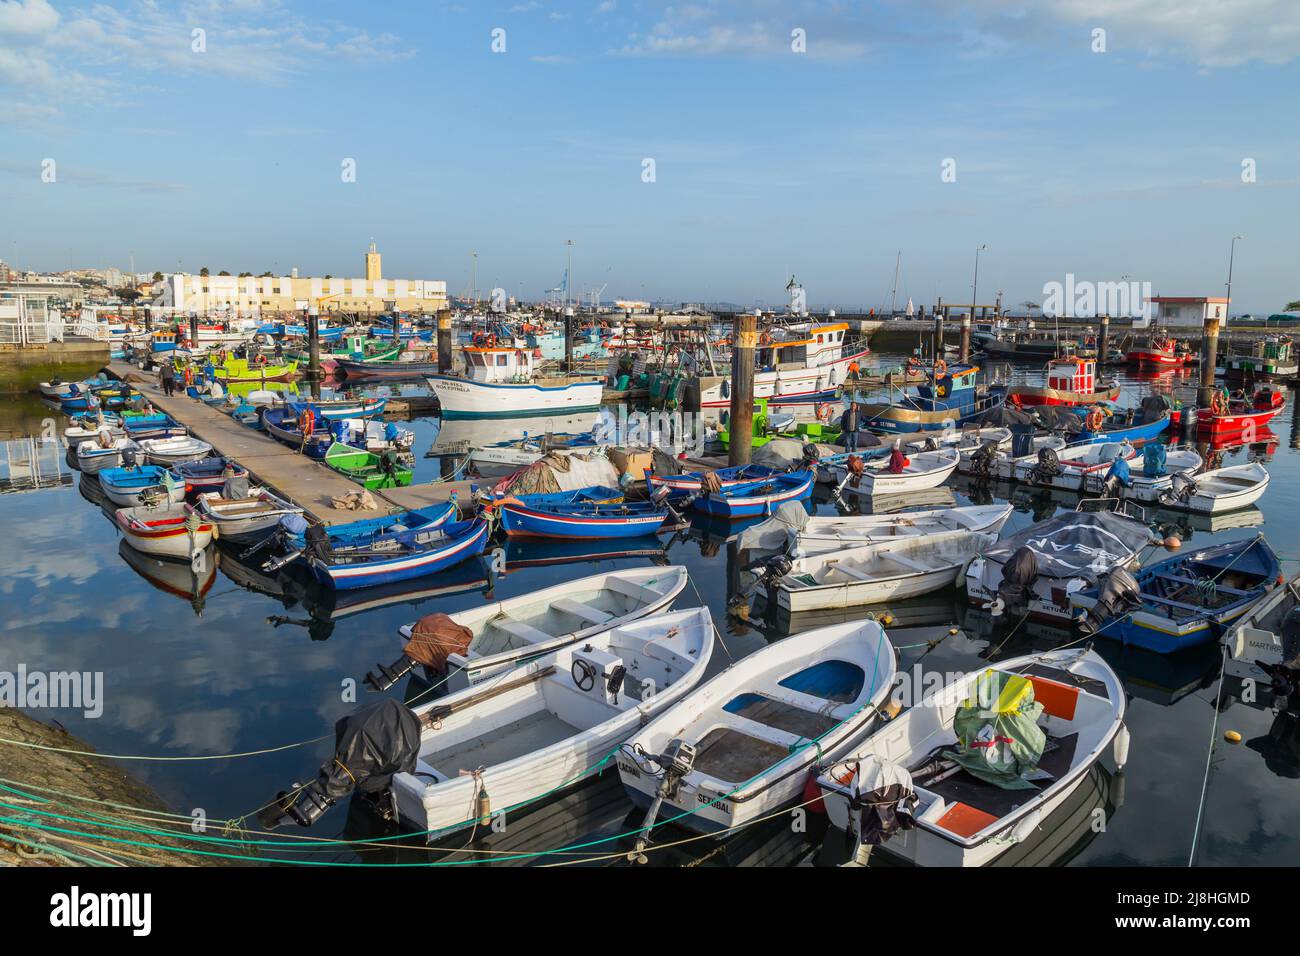 Sesimbra, Portugal - 13 March 2022: view of the harbor and village of Sesimbra in Portugal with colorful fishing boats Stock Photo